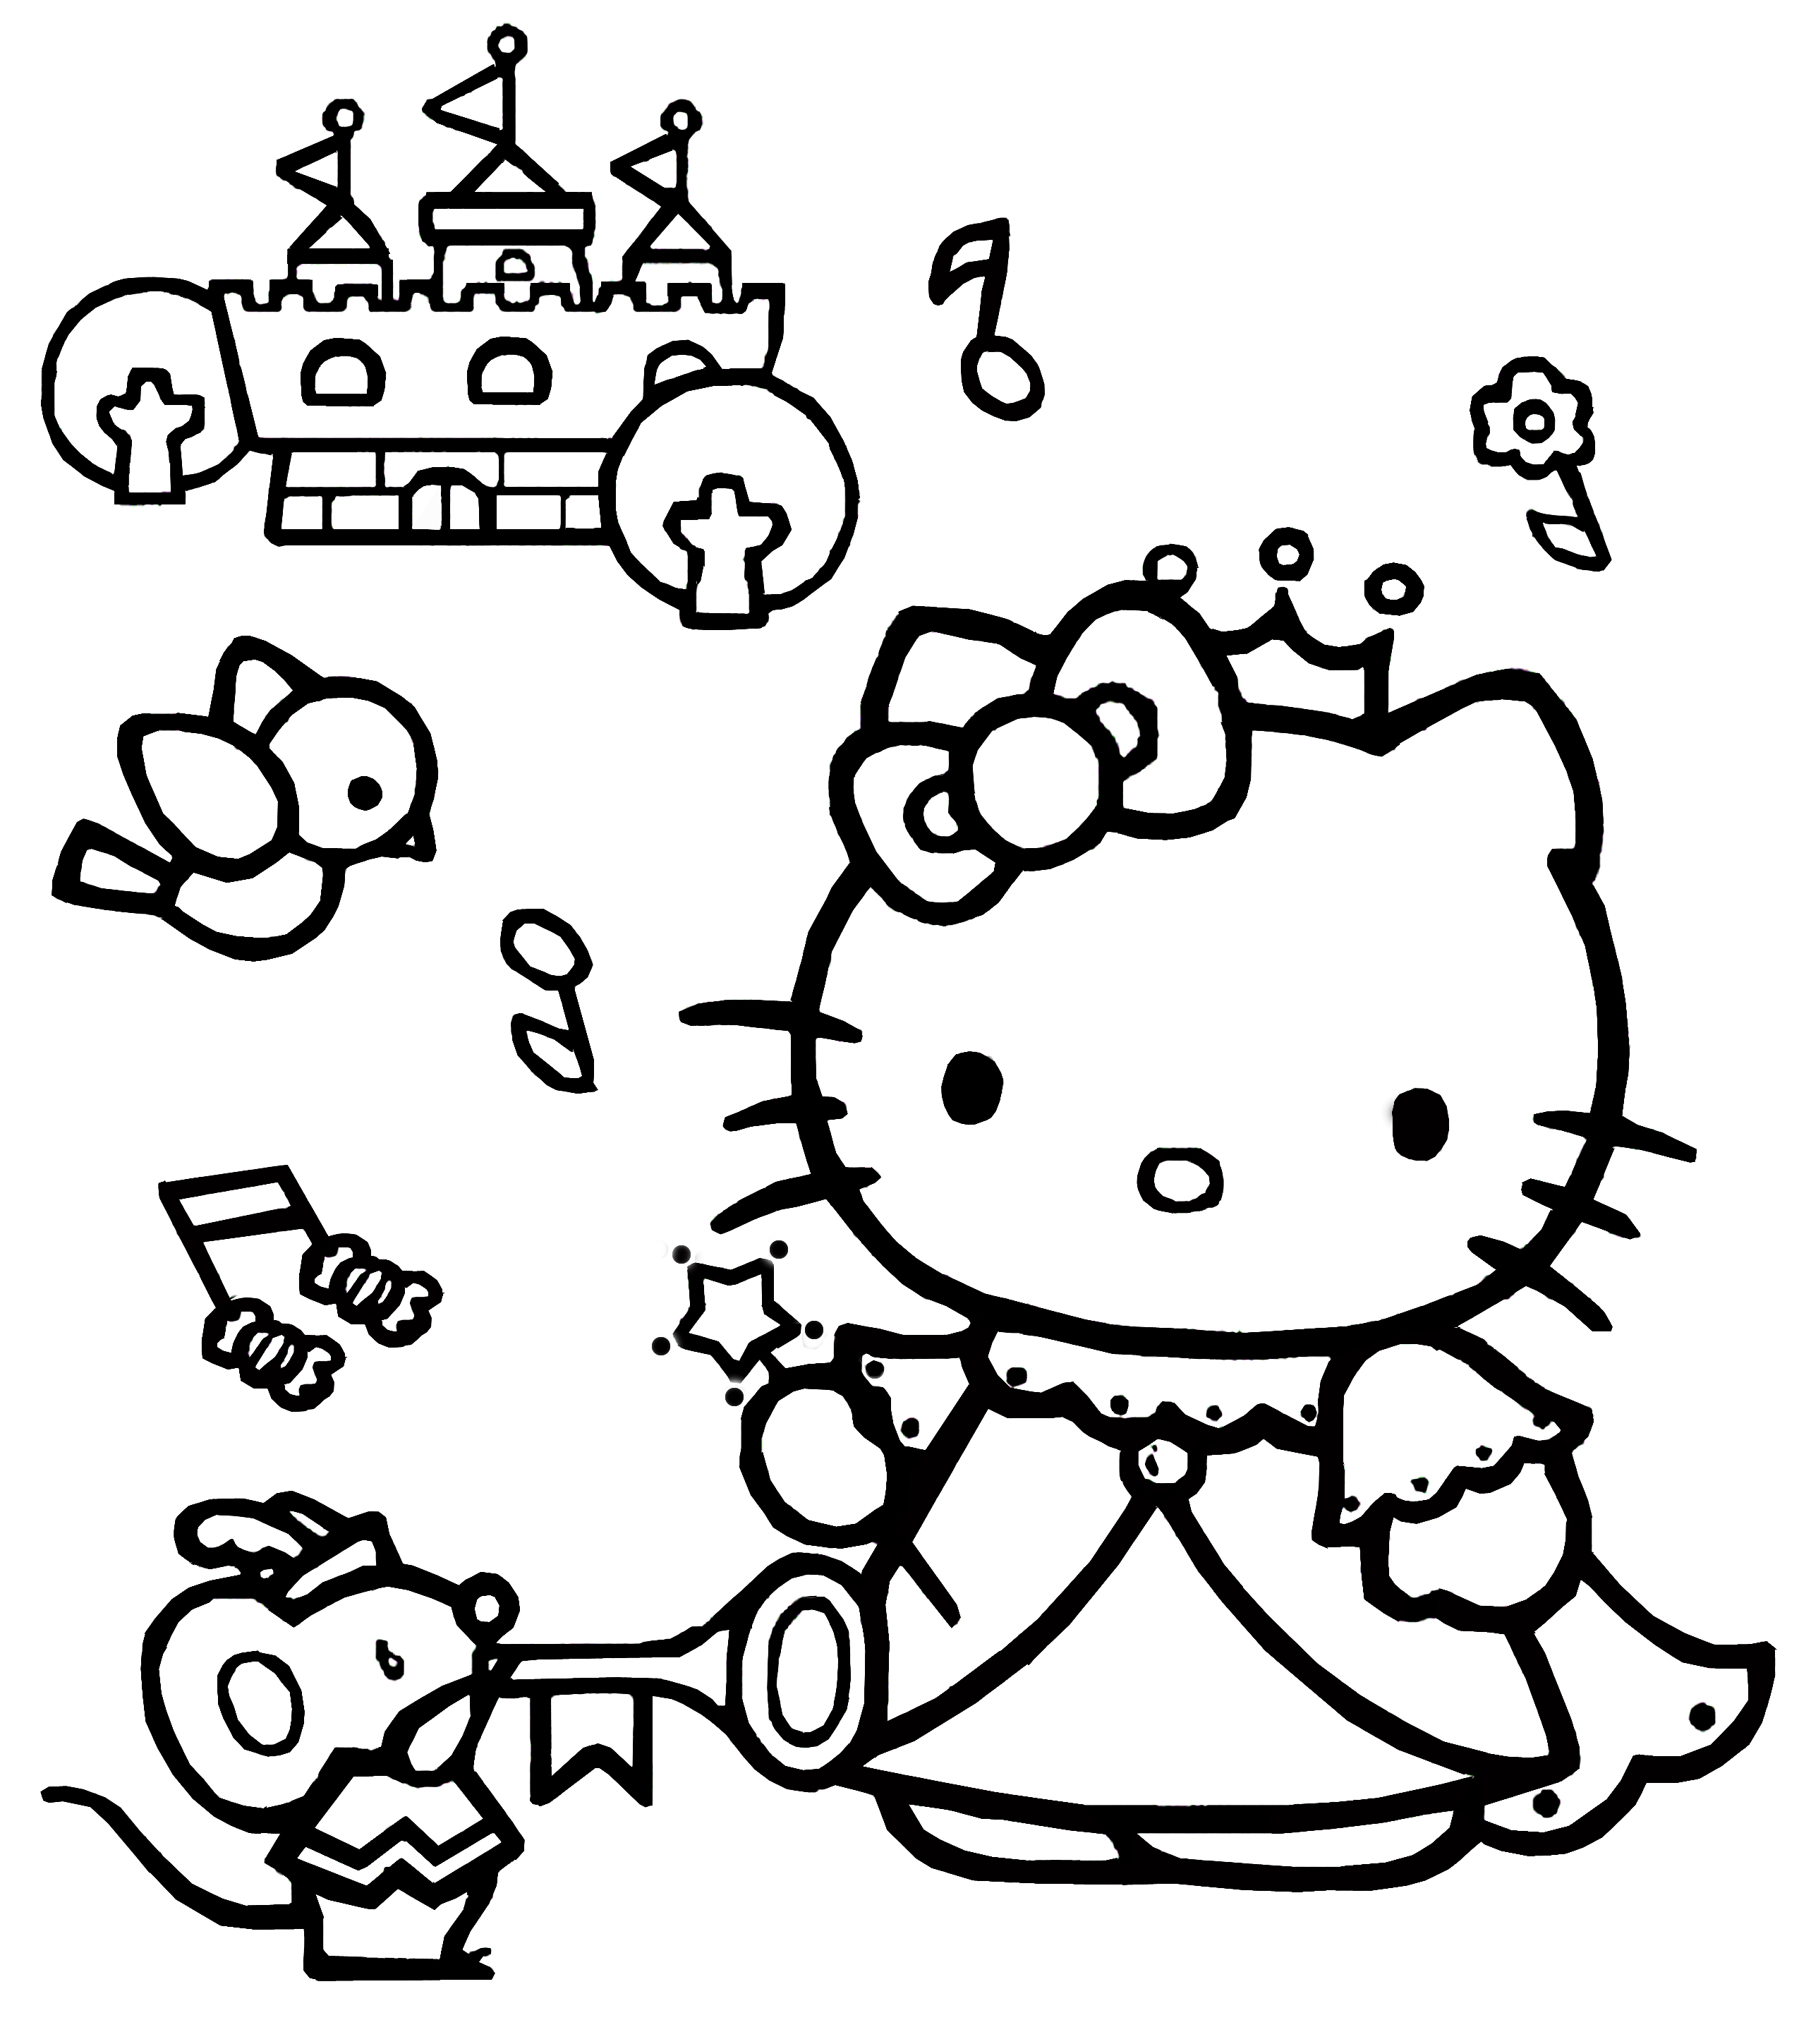 Hello Kitty Coloring Pages 06 of 15 - Princess - HD Wallpapers ...